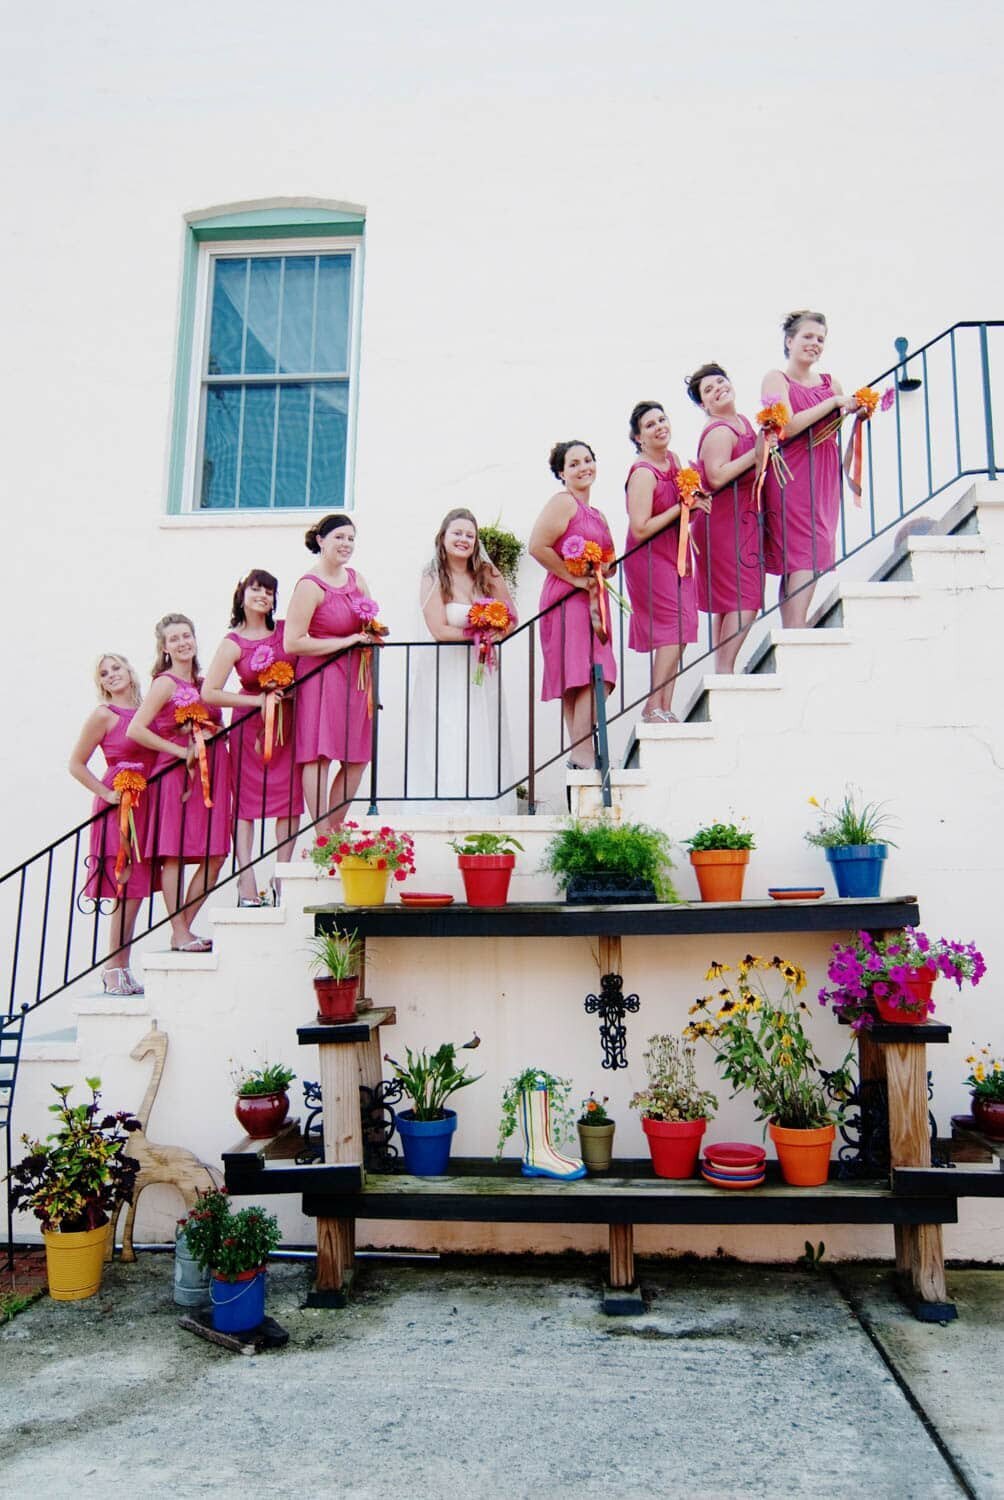 bridesmaids in pink dresses stand on a stairway overlooking a colorful wall of potted flowers